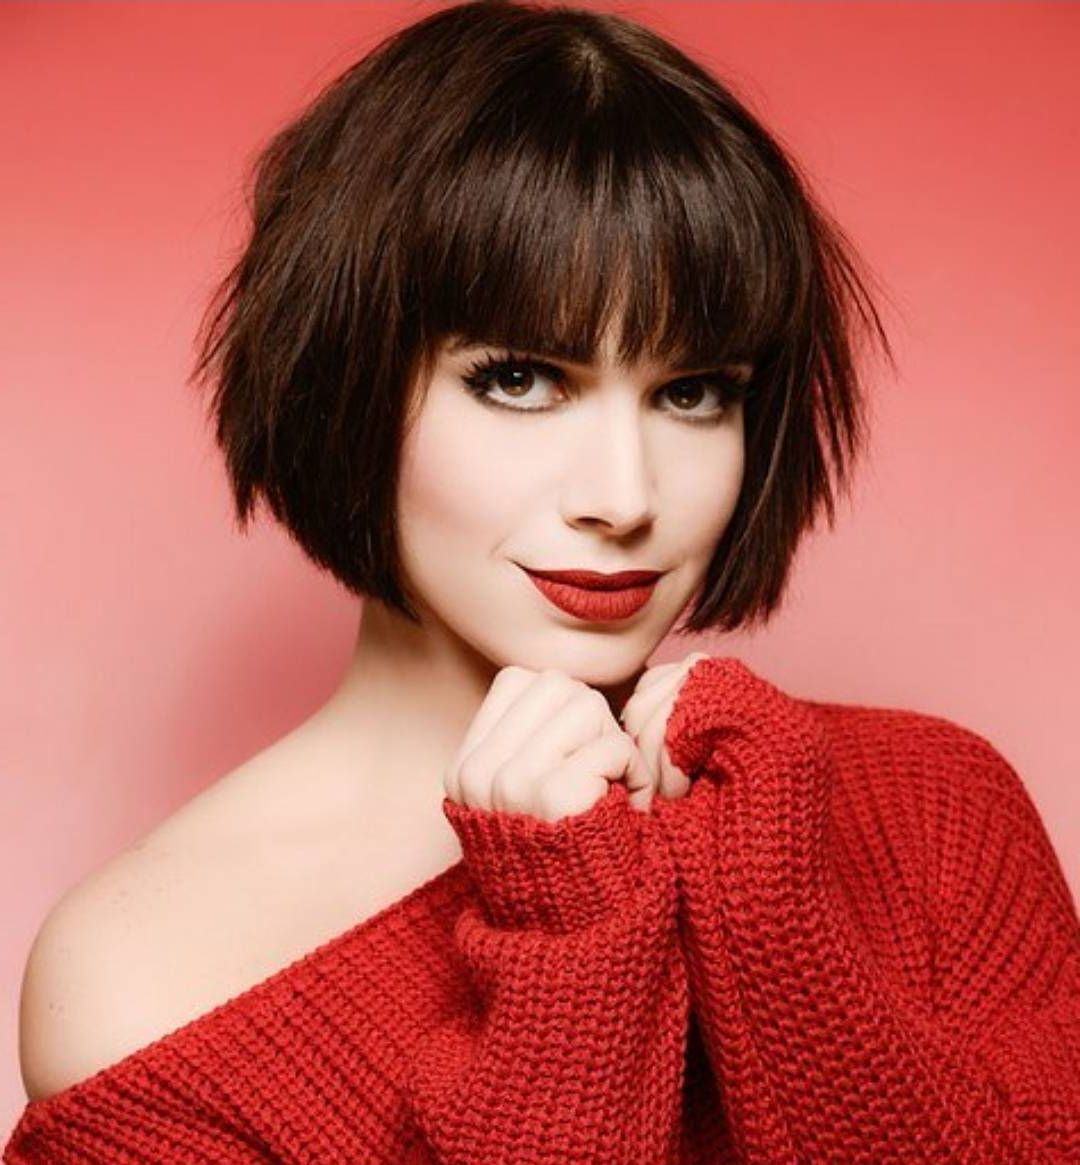 10 Chic Short Bob Haircuts That Balance Your Face Shape! – Short Pertaining To Short Hairstyles With Bangs And Layers For Round Faces (View 11 of 25)